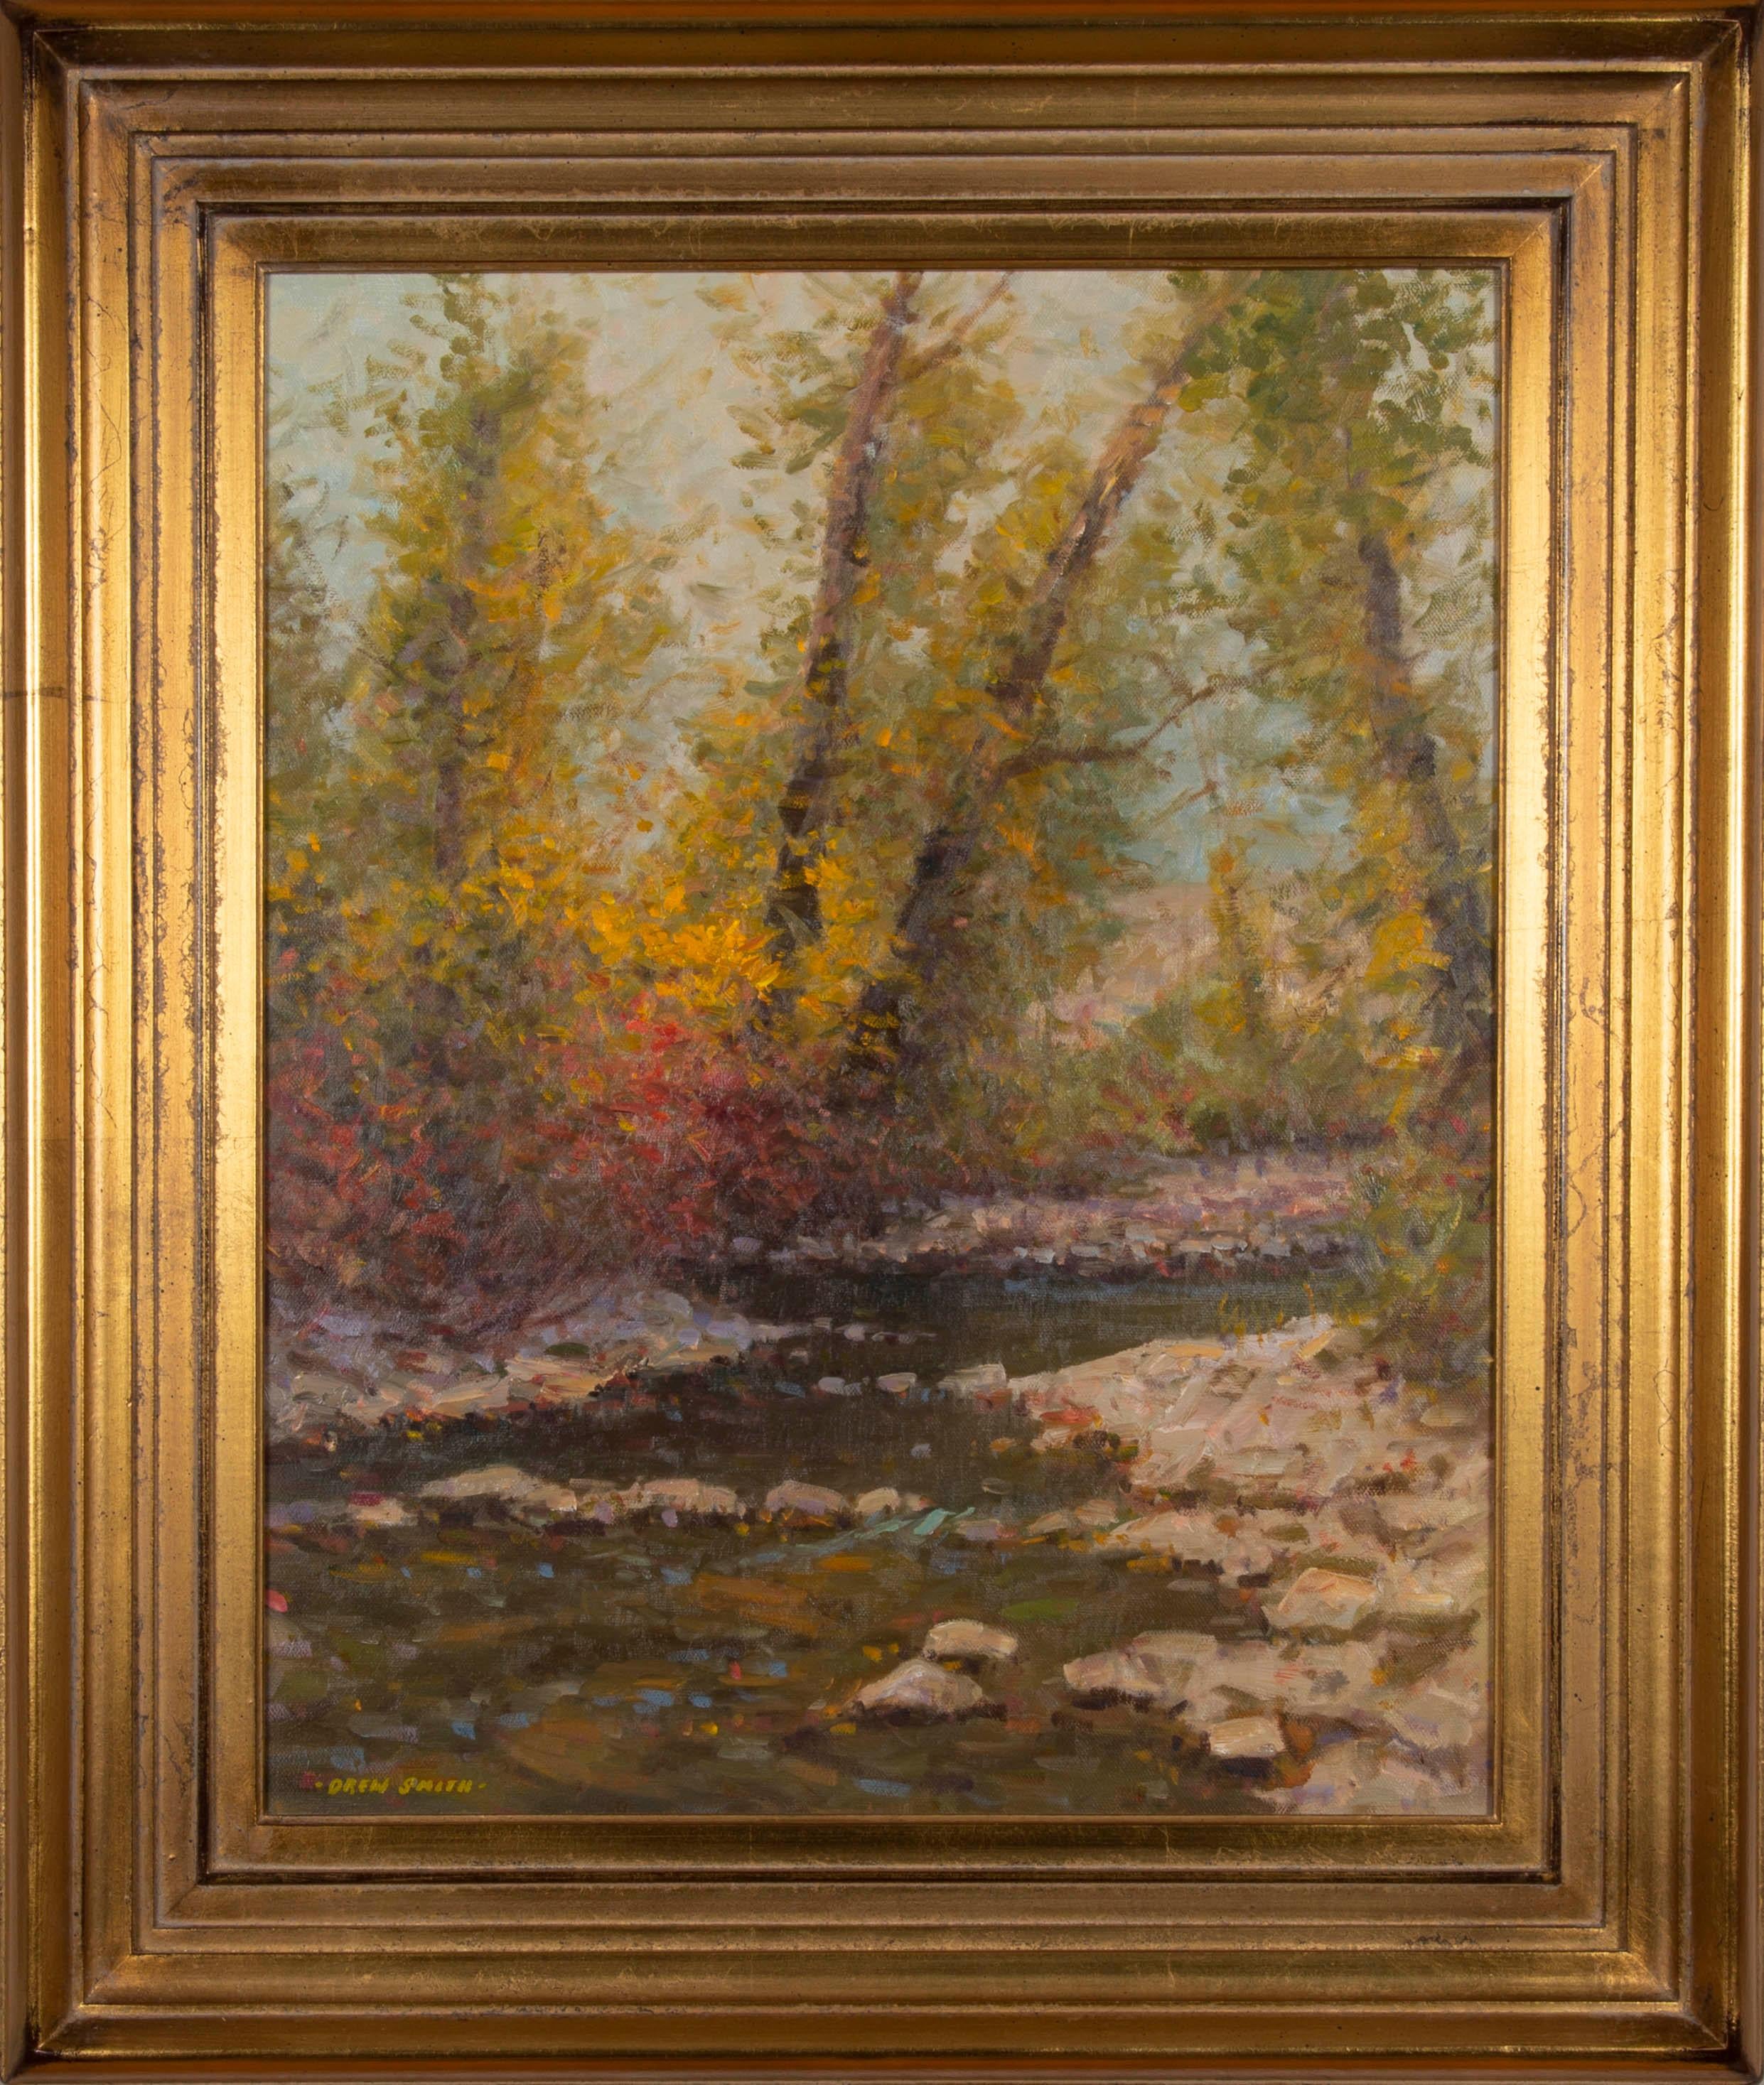 "September Song" by Drew Smith, 20" x 16" Impressionist River Landscape Oil Painting in a 26" x 22" Gold Frame.

As a native of Idaho Falls, Drew was inspired since early childhood by the beauty of the surrounding Intermountain Region. The Tetons,